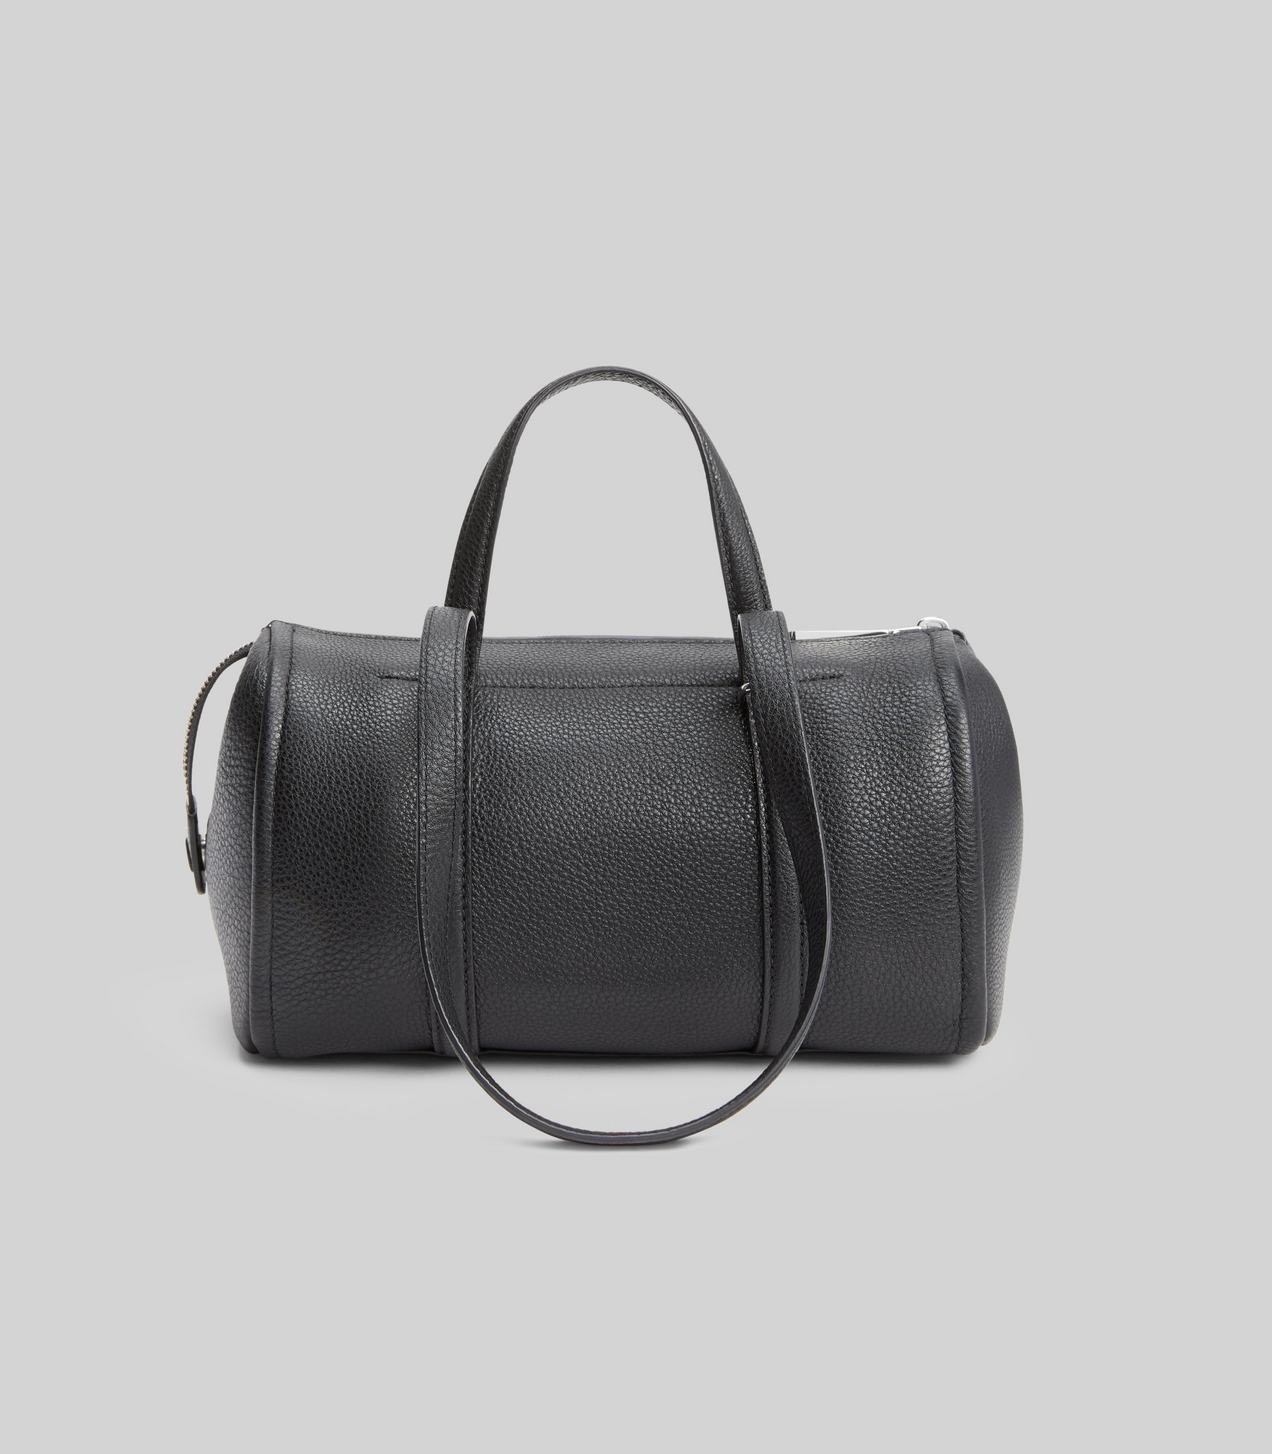 The Tag Bauletto Bag